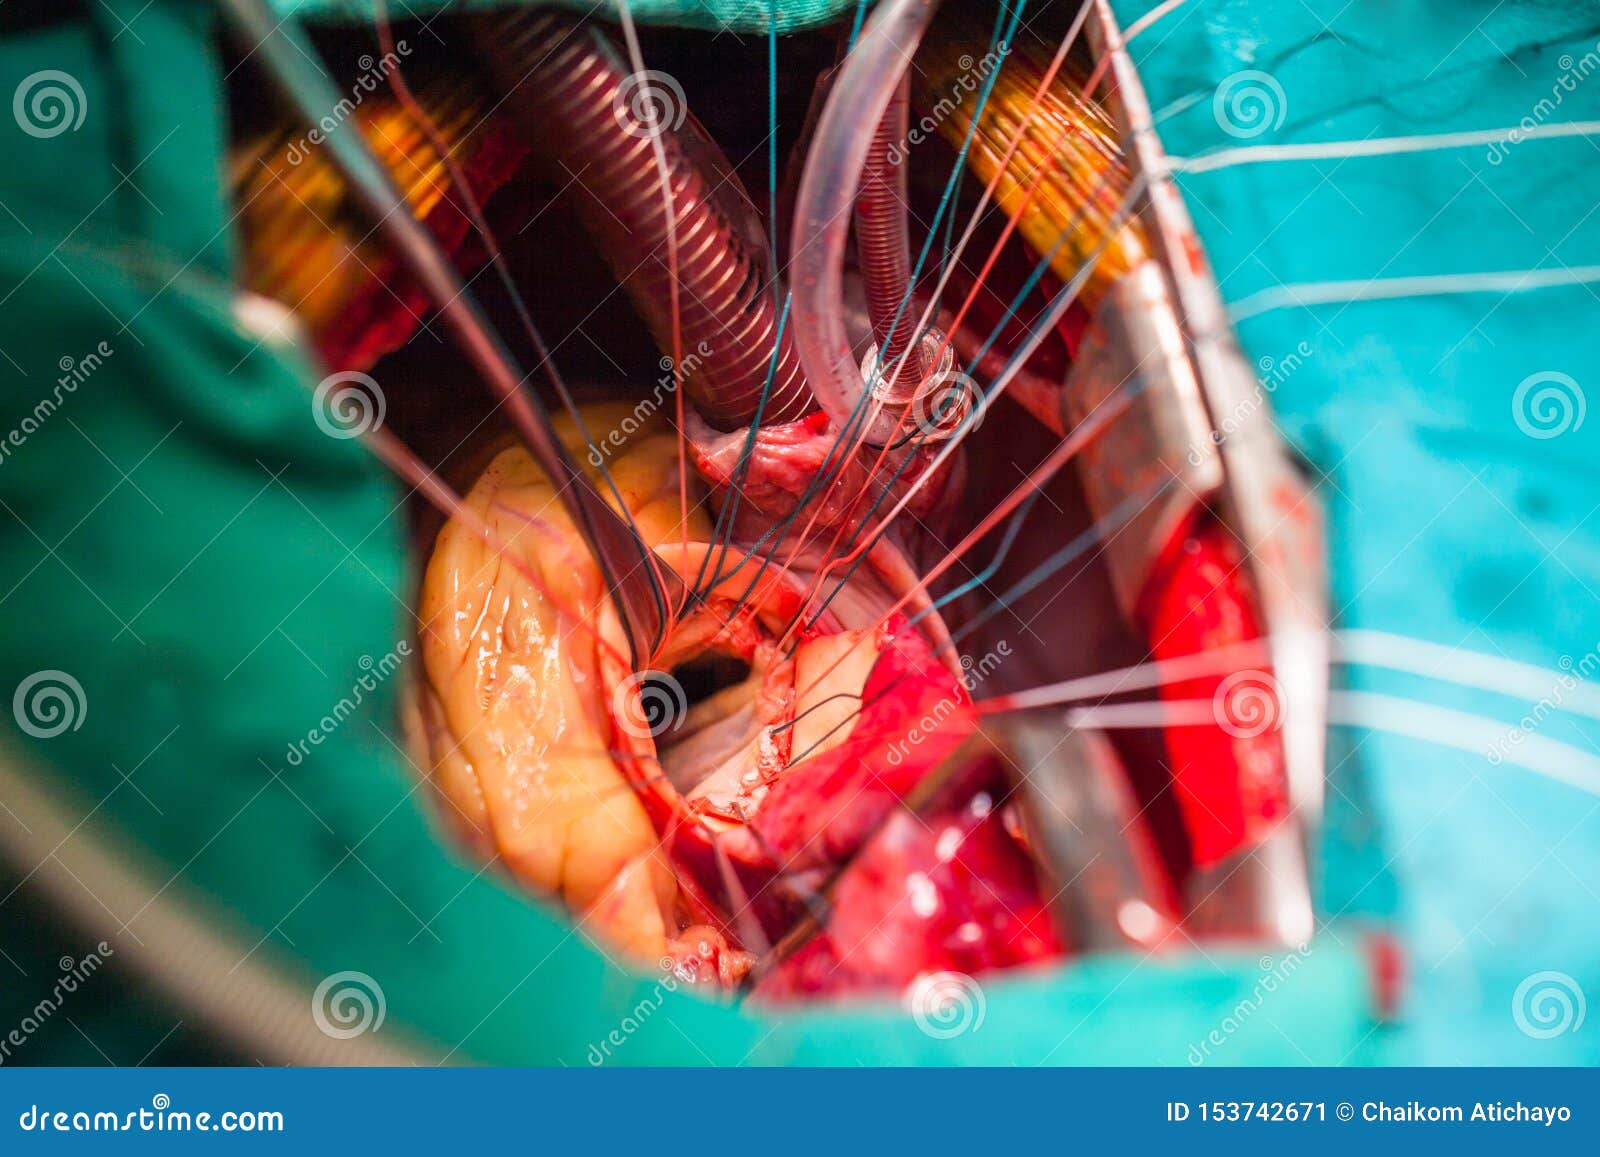 Potential and challenges of Transcatheter mitral valve implantation